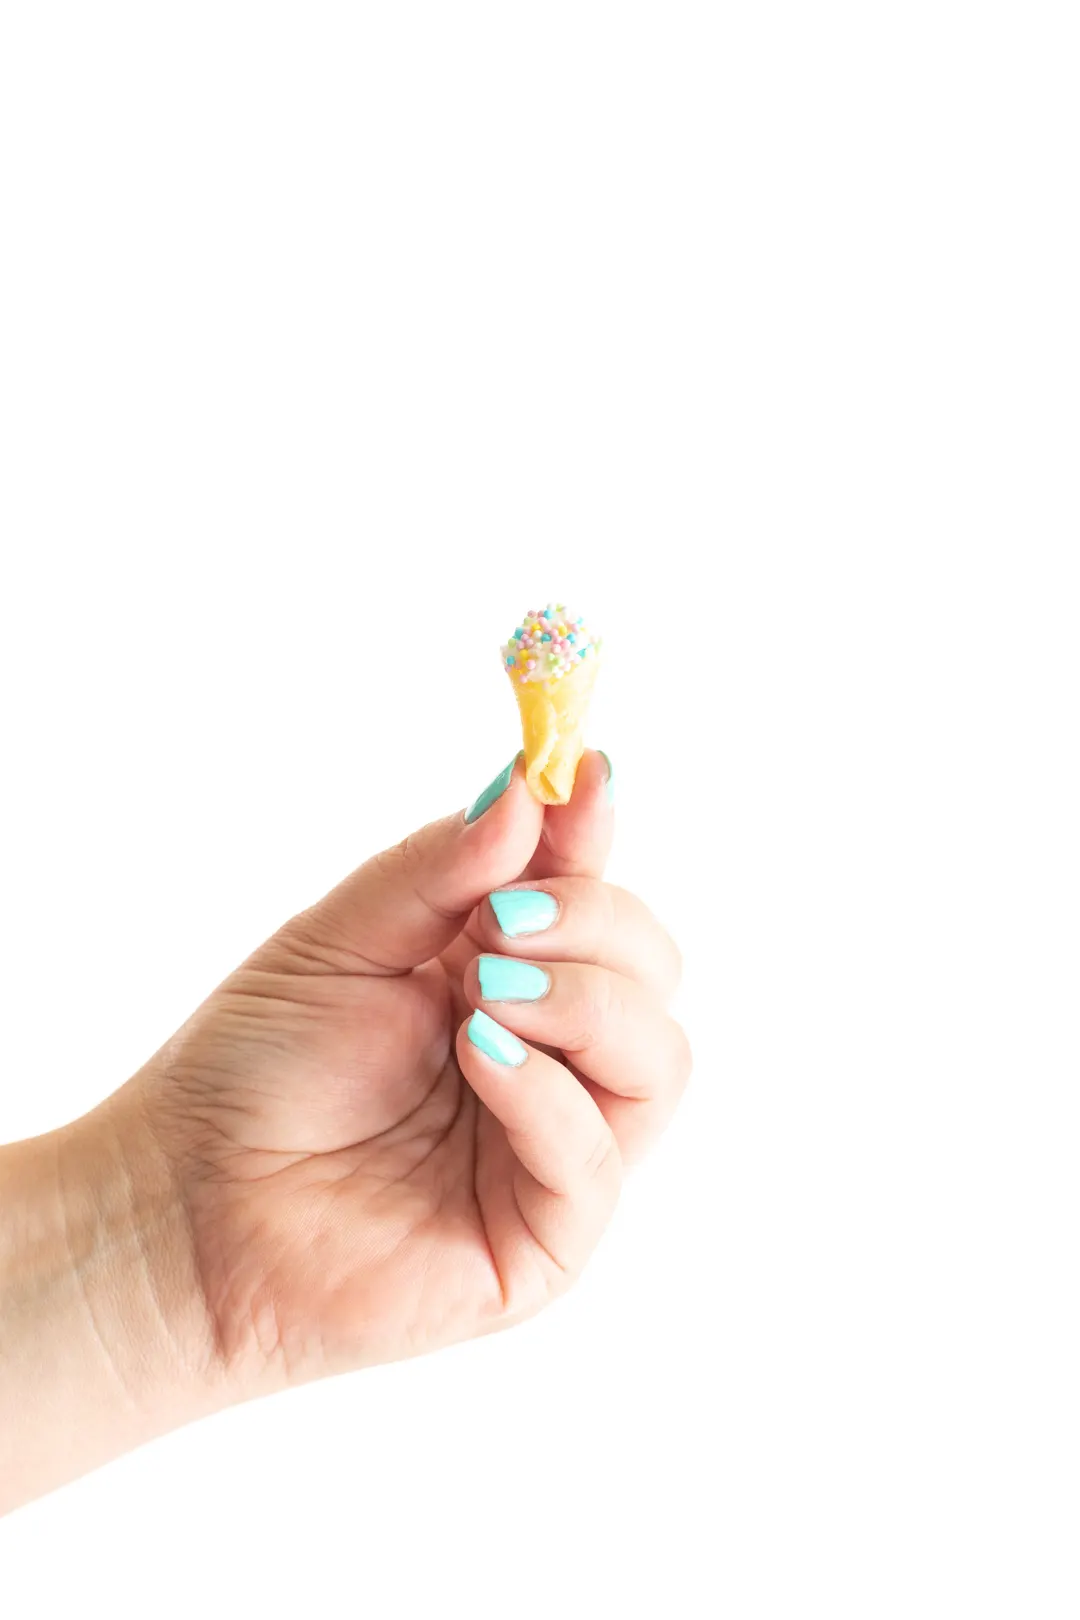 tiniest ice cream cone with sprinkles being held by woman with teal fingernails